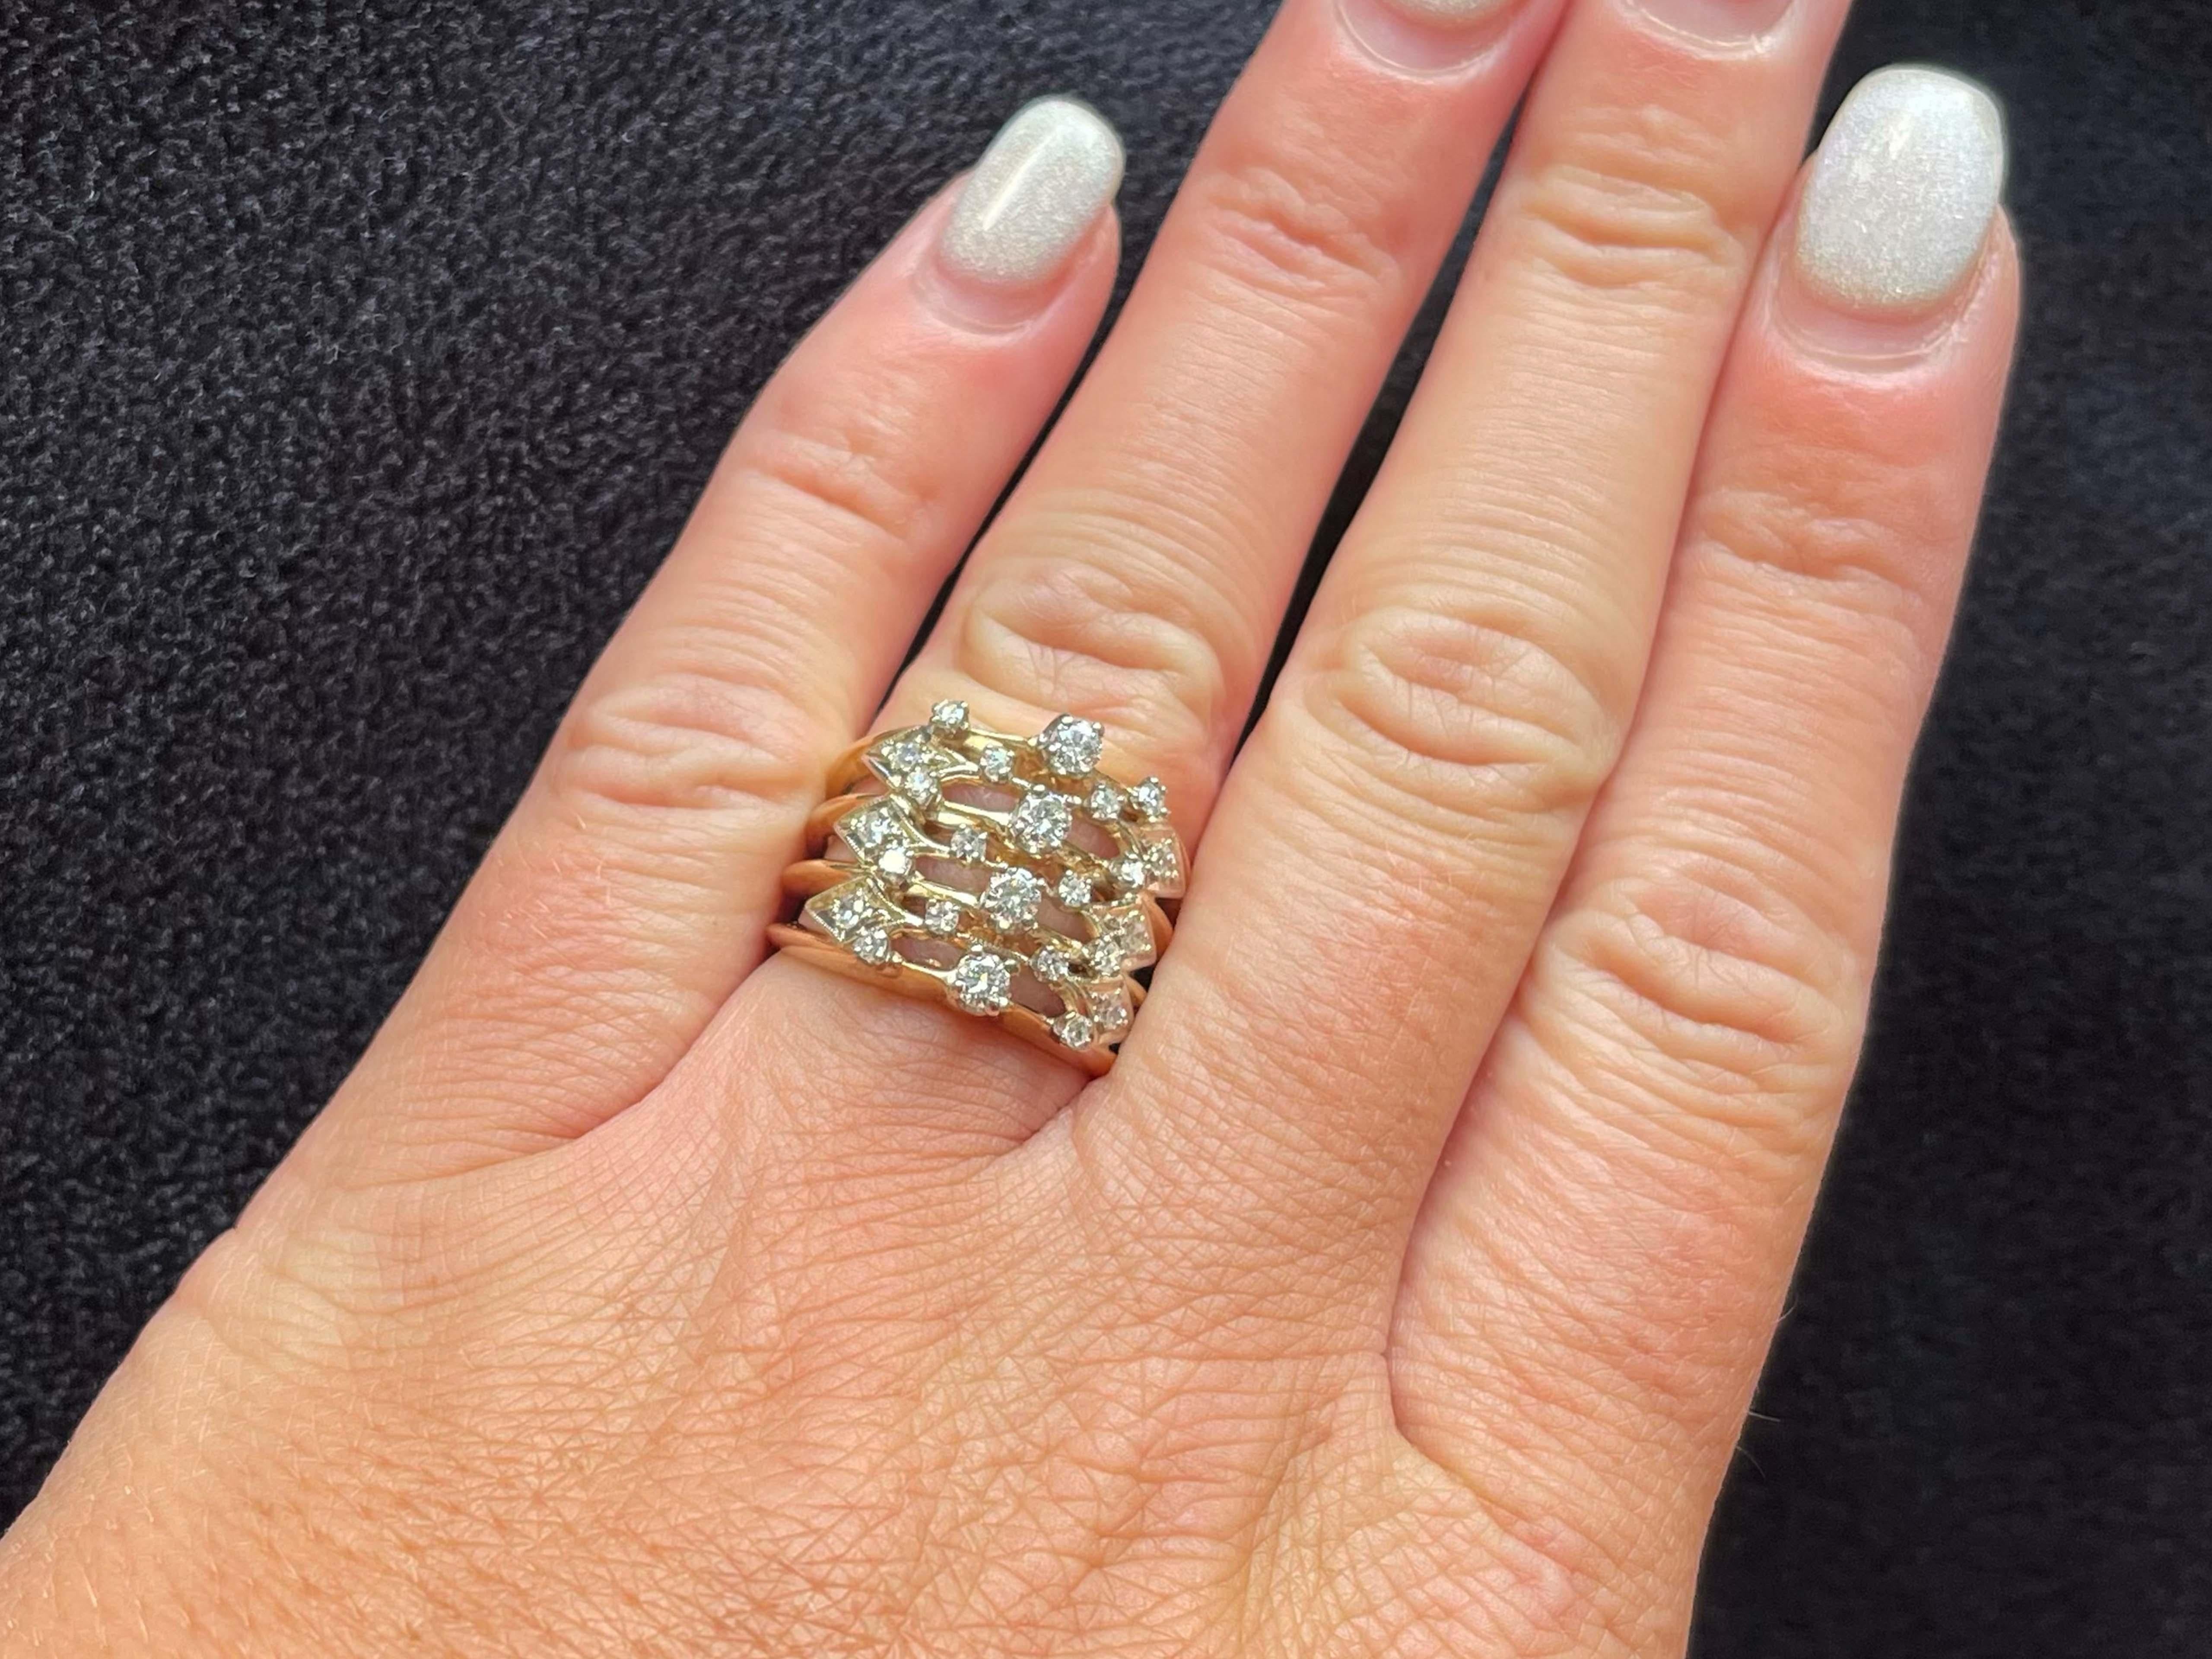 Item Specifications:

Metal: 14K Yellow Gold

Style: Statement Ring

Ring Size: 6 (resizing available for a fee)

Total Weight: 10 Grams
​
​Diamond Count: 24

Diamond Cut: brilliant and single cut

Diamond Carat Weight: 0.45

Diamond Color: